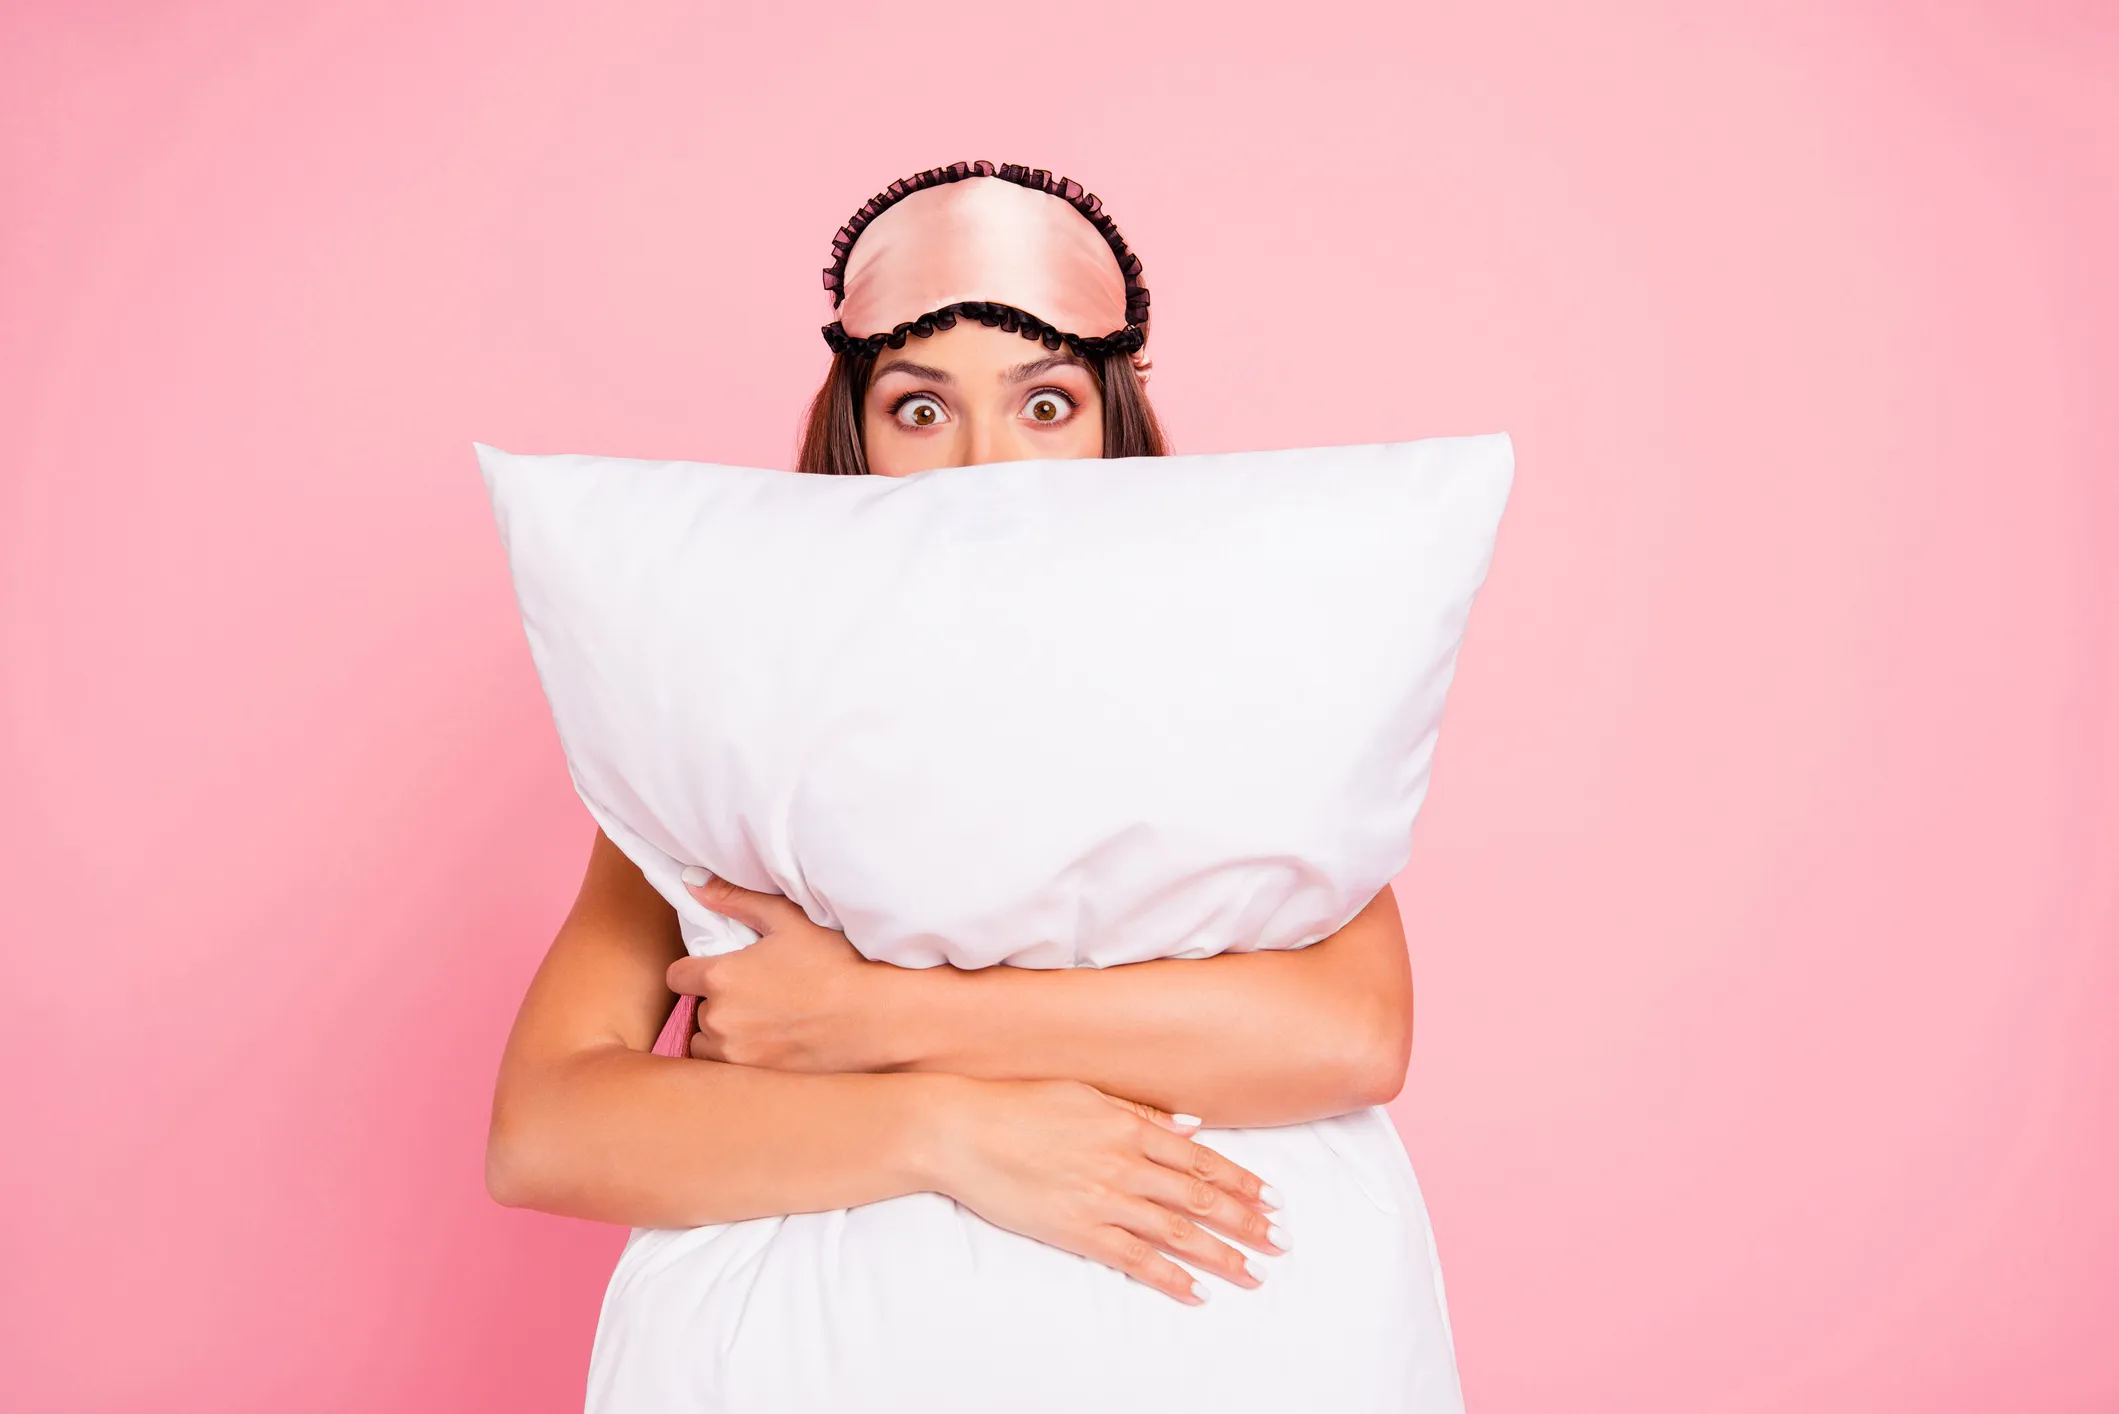 How Often Should You Change Your Pillowcase?